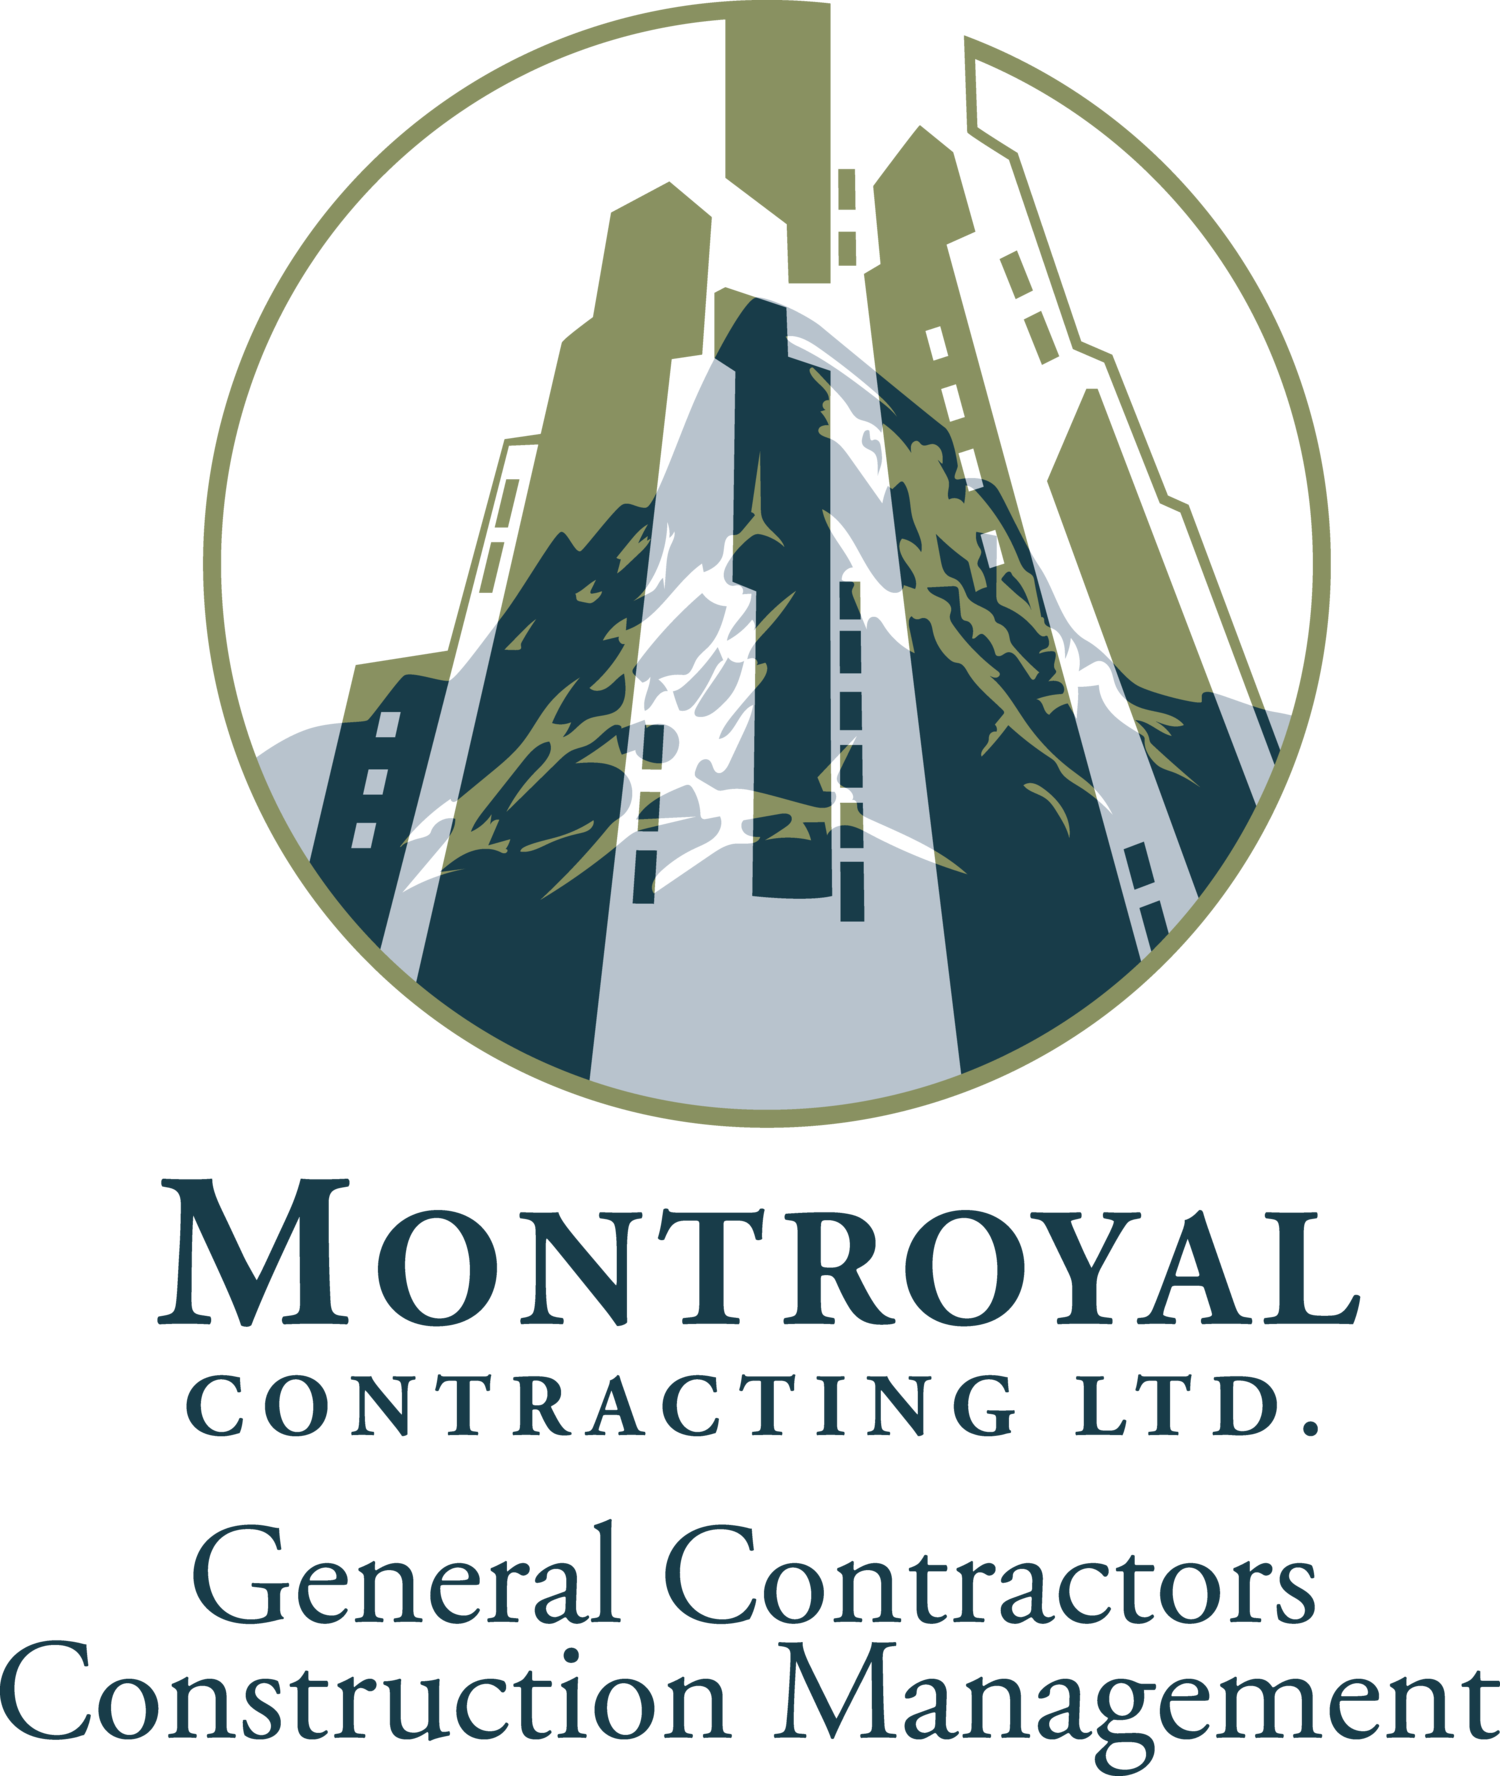 Montroyal Contracting